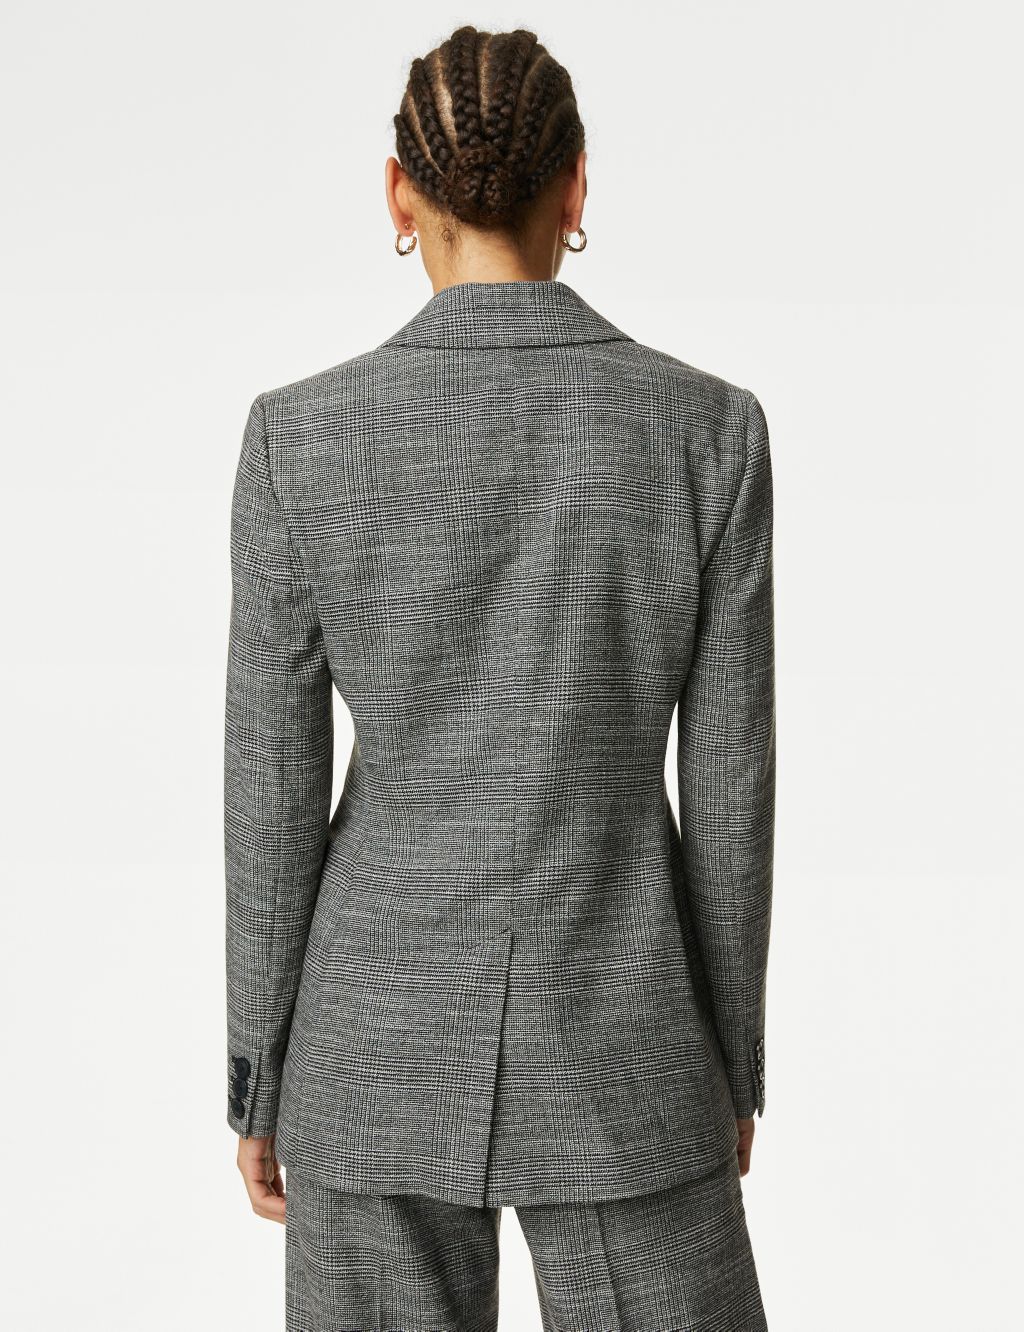 Tailored Checked Double Breasted Blazer image 7